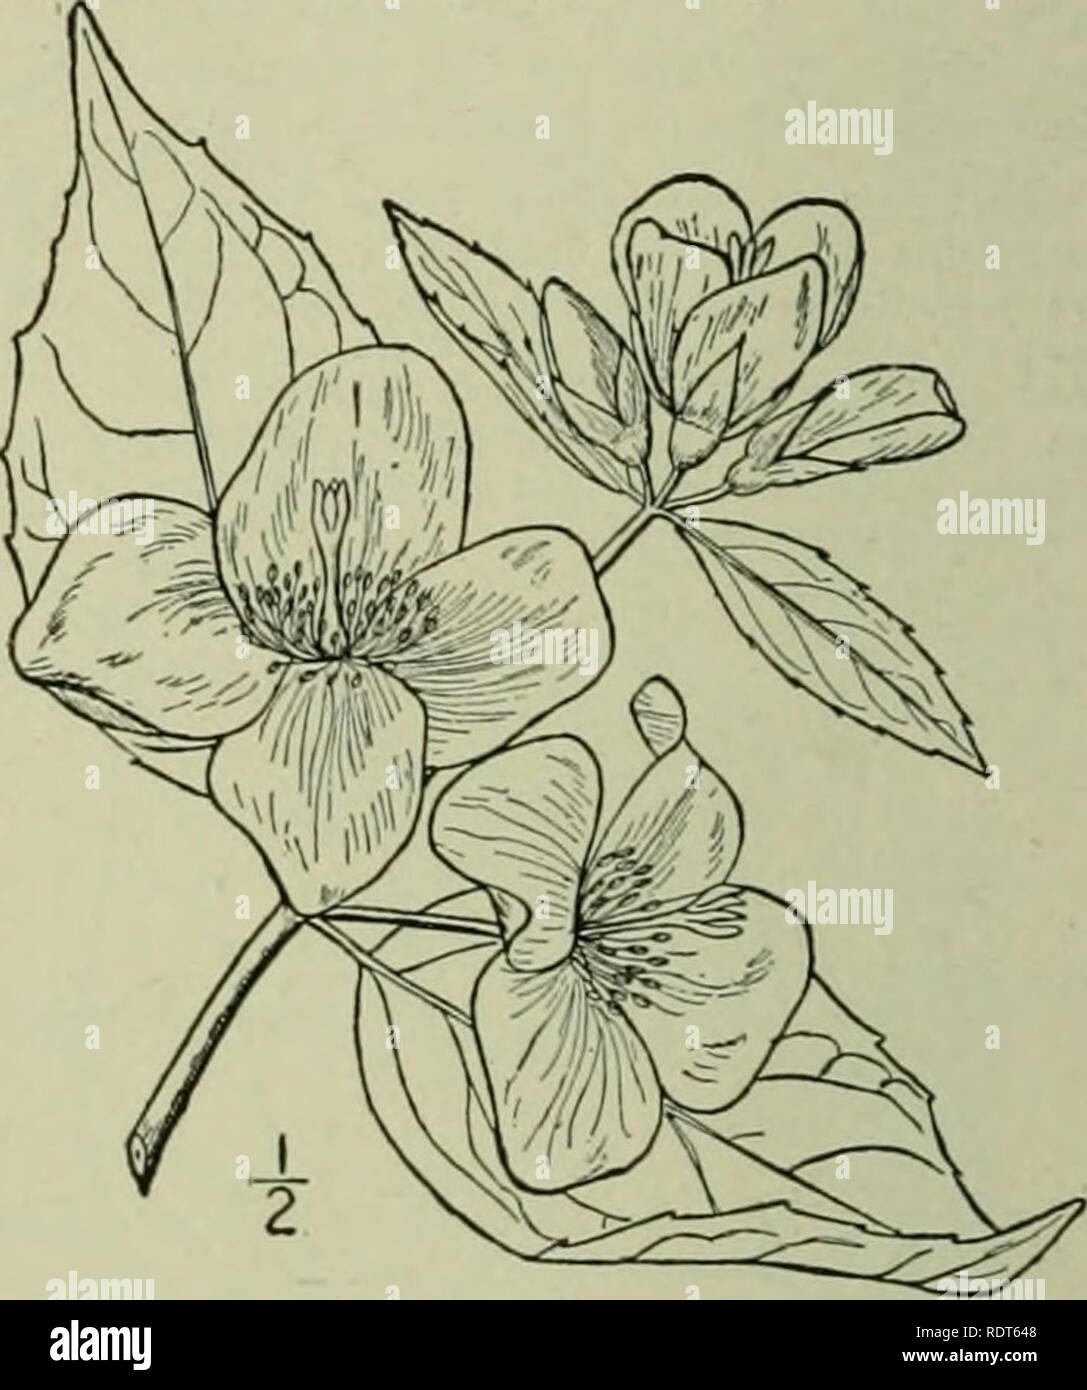 . An illustrated flora of the northern United States, Canada and the British possessions : from Newfoundland to the parallel of the southern boundary of Virginia and from the Atlantic Ocean westward to the 102nd meridian. Botany. I. Philadelphus inodorus L. Scentless Syringa. Fig. 2189. Philadelphus inodorus L. Sp. PI. 470. 1803. A shrub, 6°-8° high, glabrous or very nearly so throughout. Leaves ovate or oval, acute or acu- minate at the apex, rounded or sometimes nar- rowed at the base, 2-5' long, strongly 3-nerved, serrate with small distant teeth, or entire; flow- ers white, inodorous, abou Stock Photo